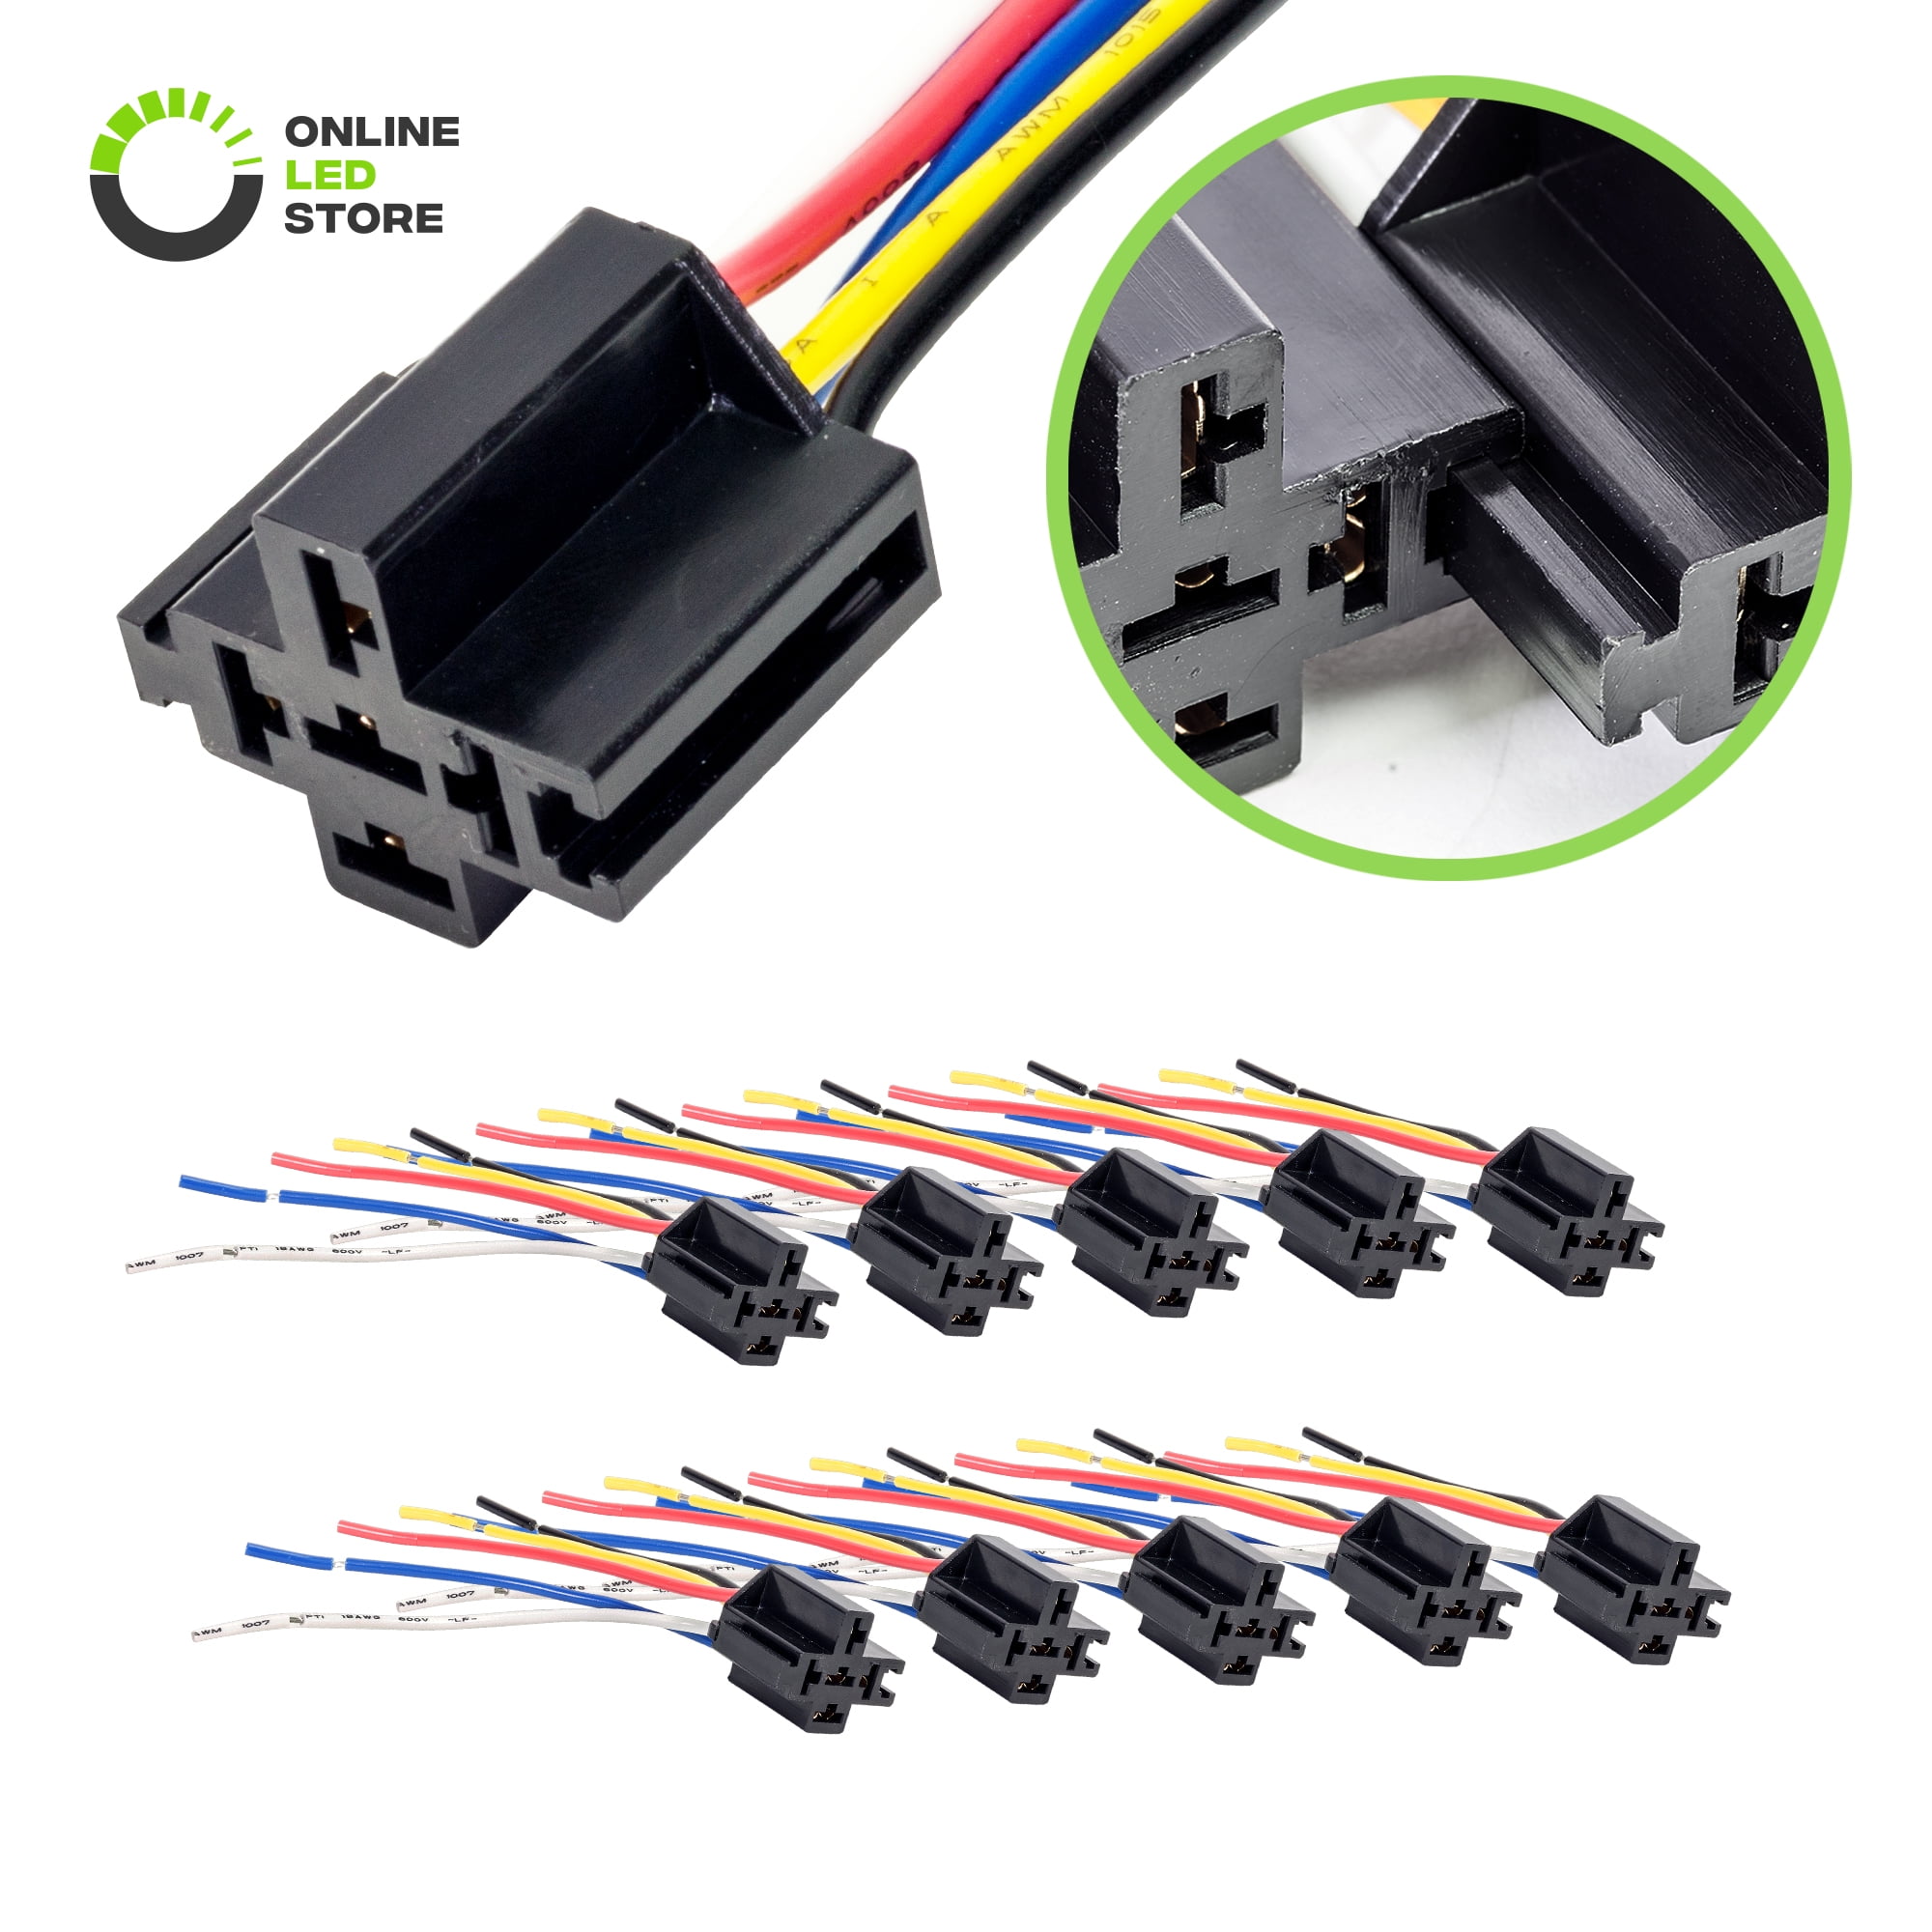 10pc 12V 30/40 Amp 5-Pin SPDT Automotive Relay with Wires & Harness Socket Set 